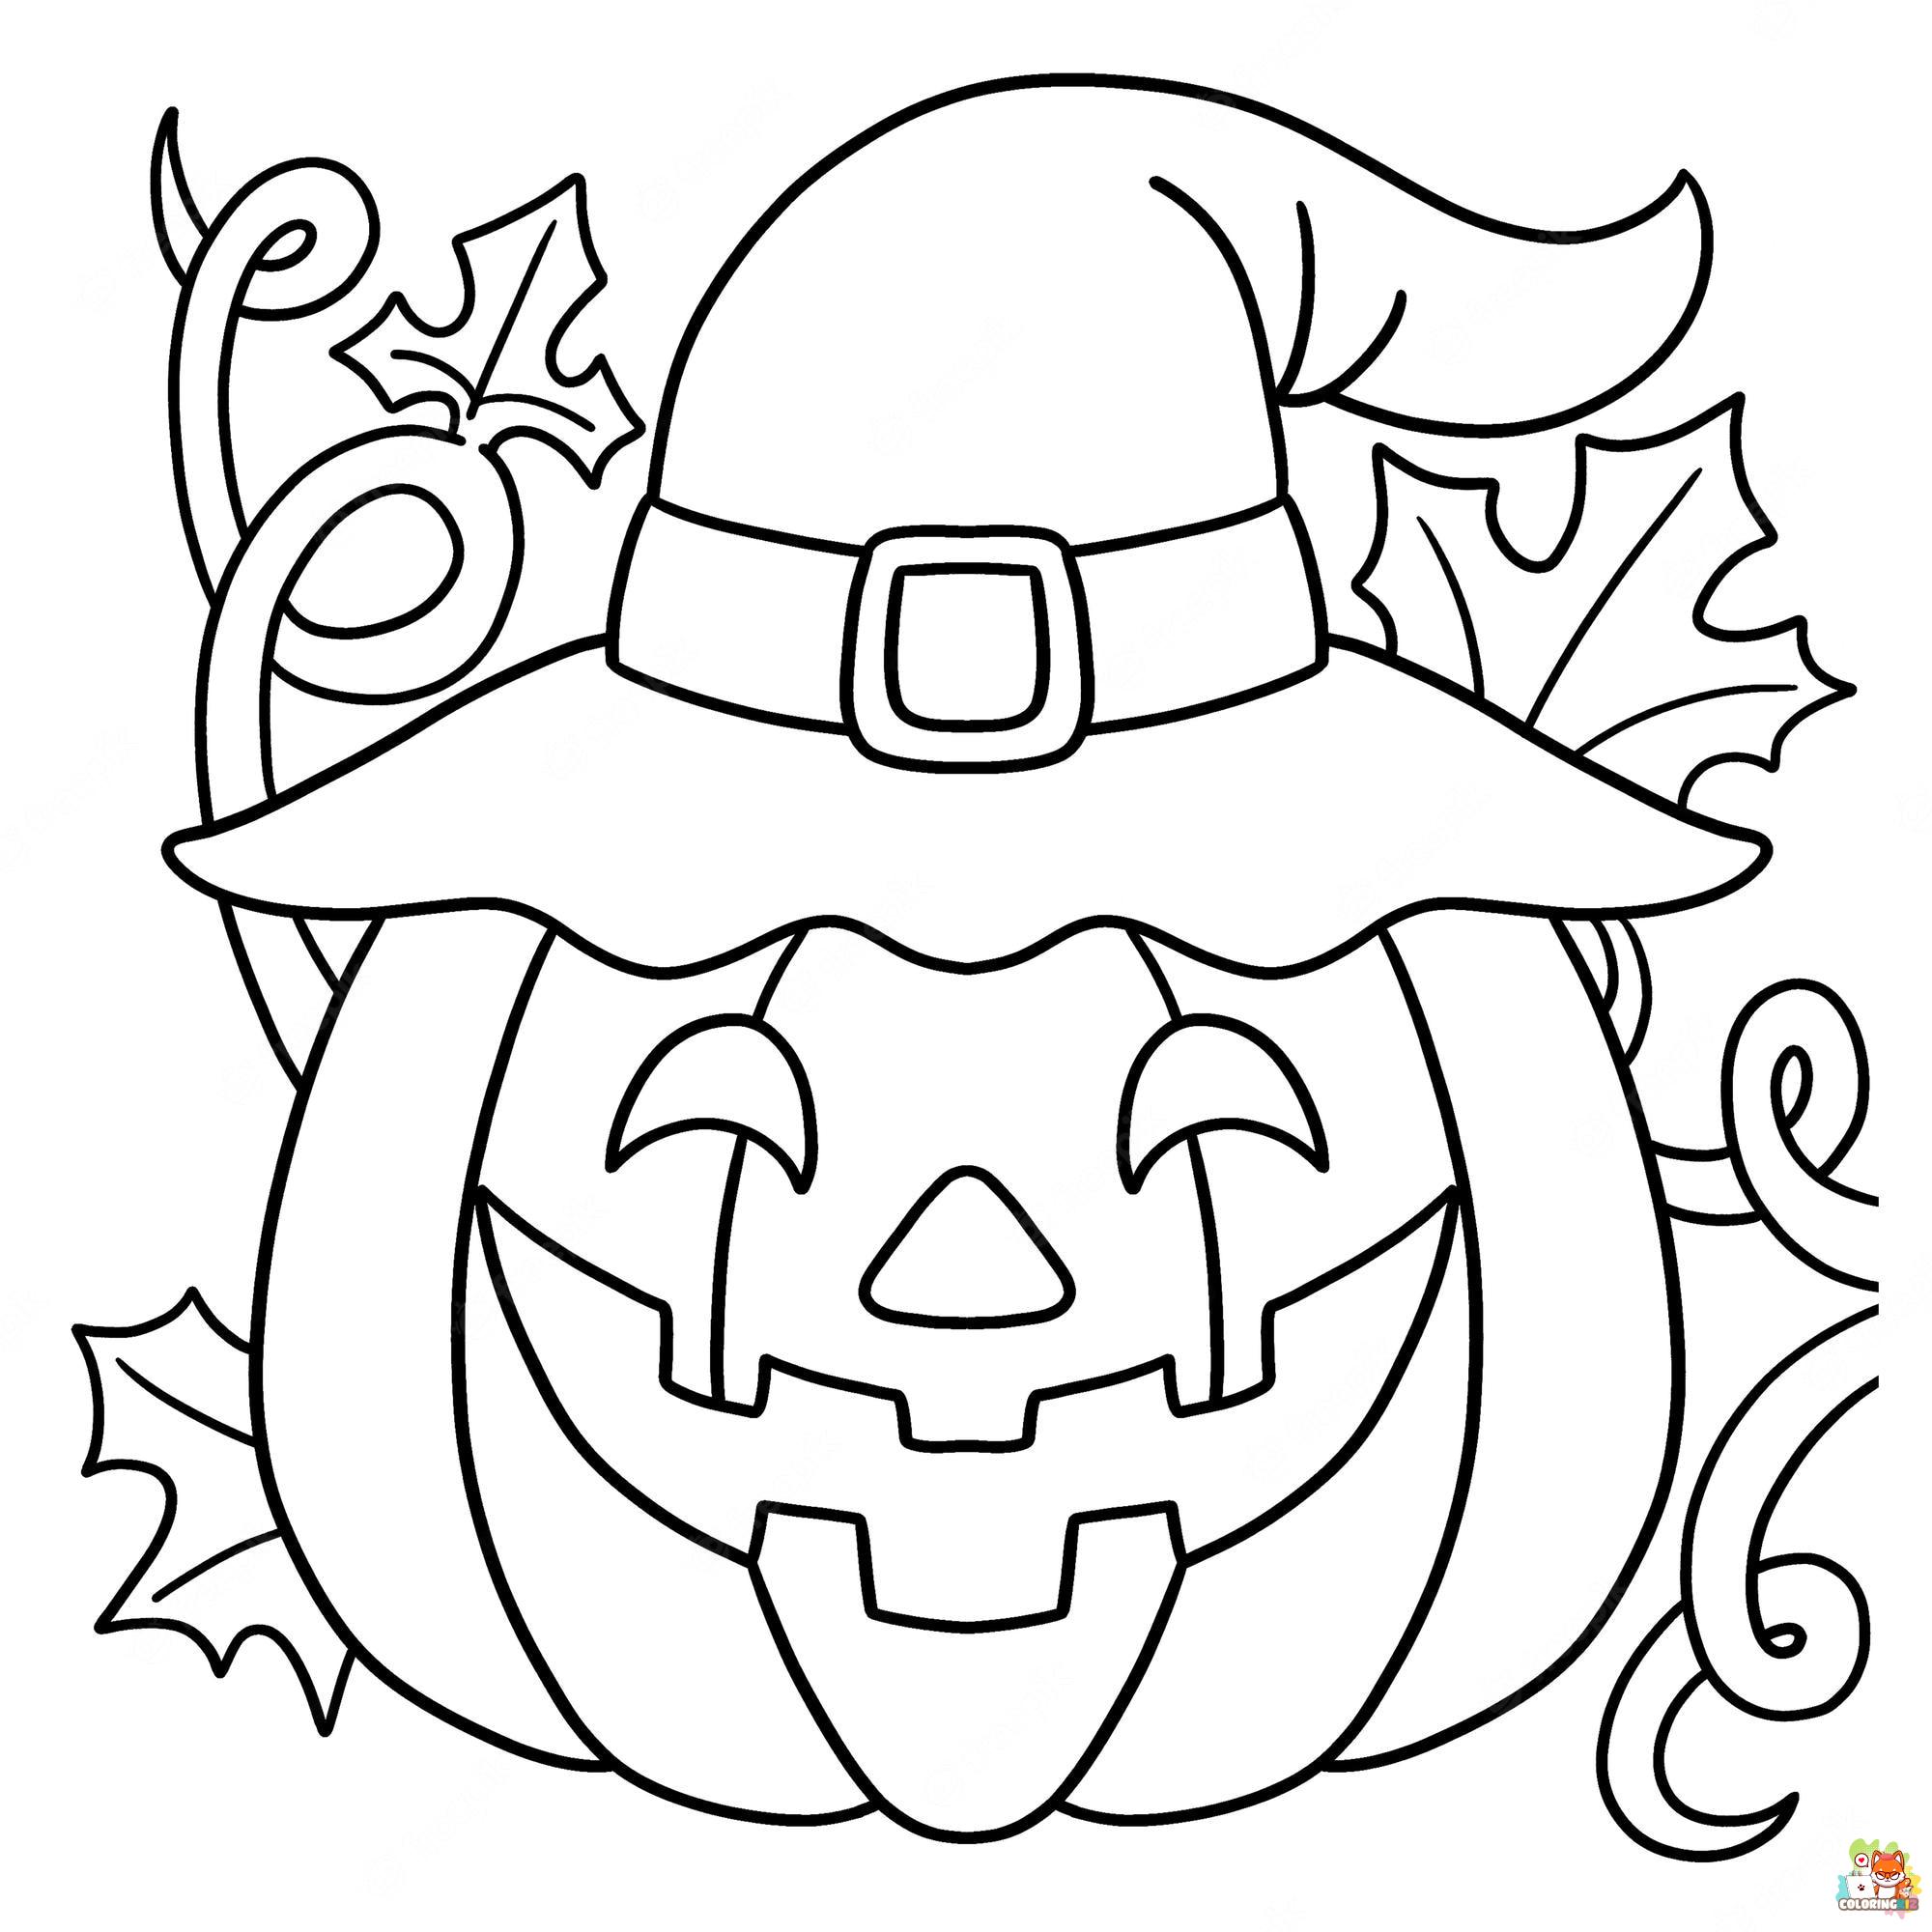 Pumpkin Halloween Coloring Pages 5